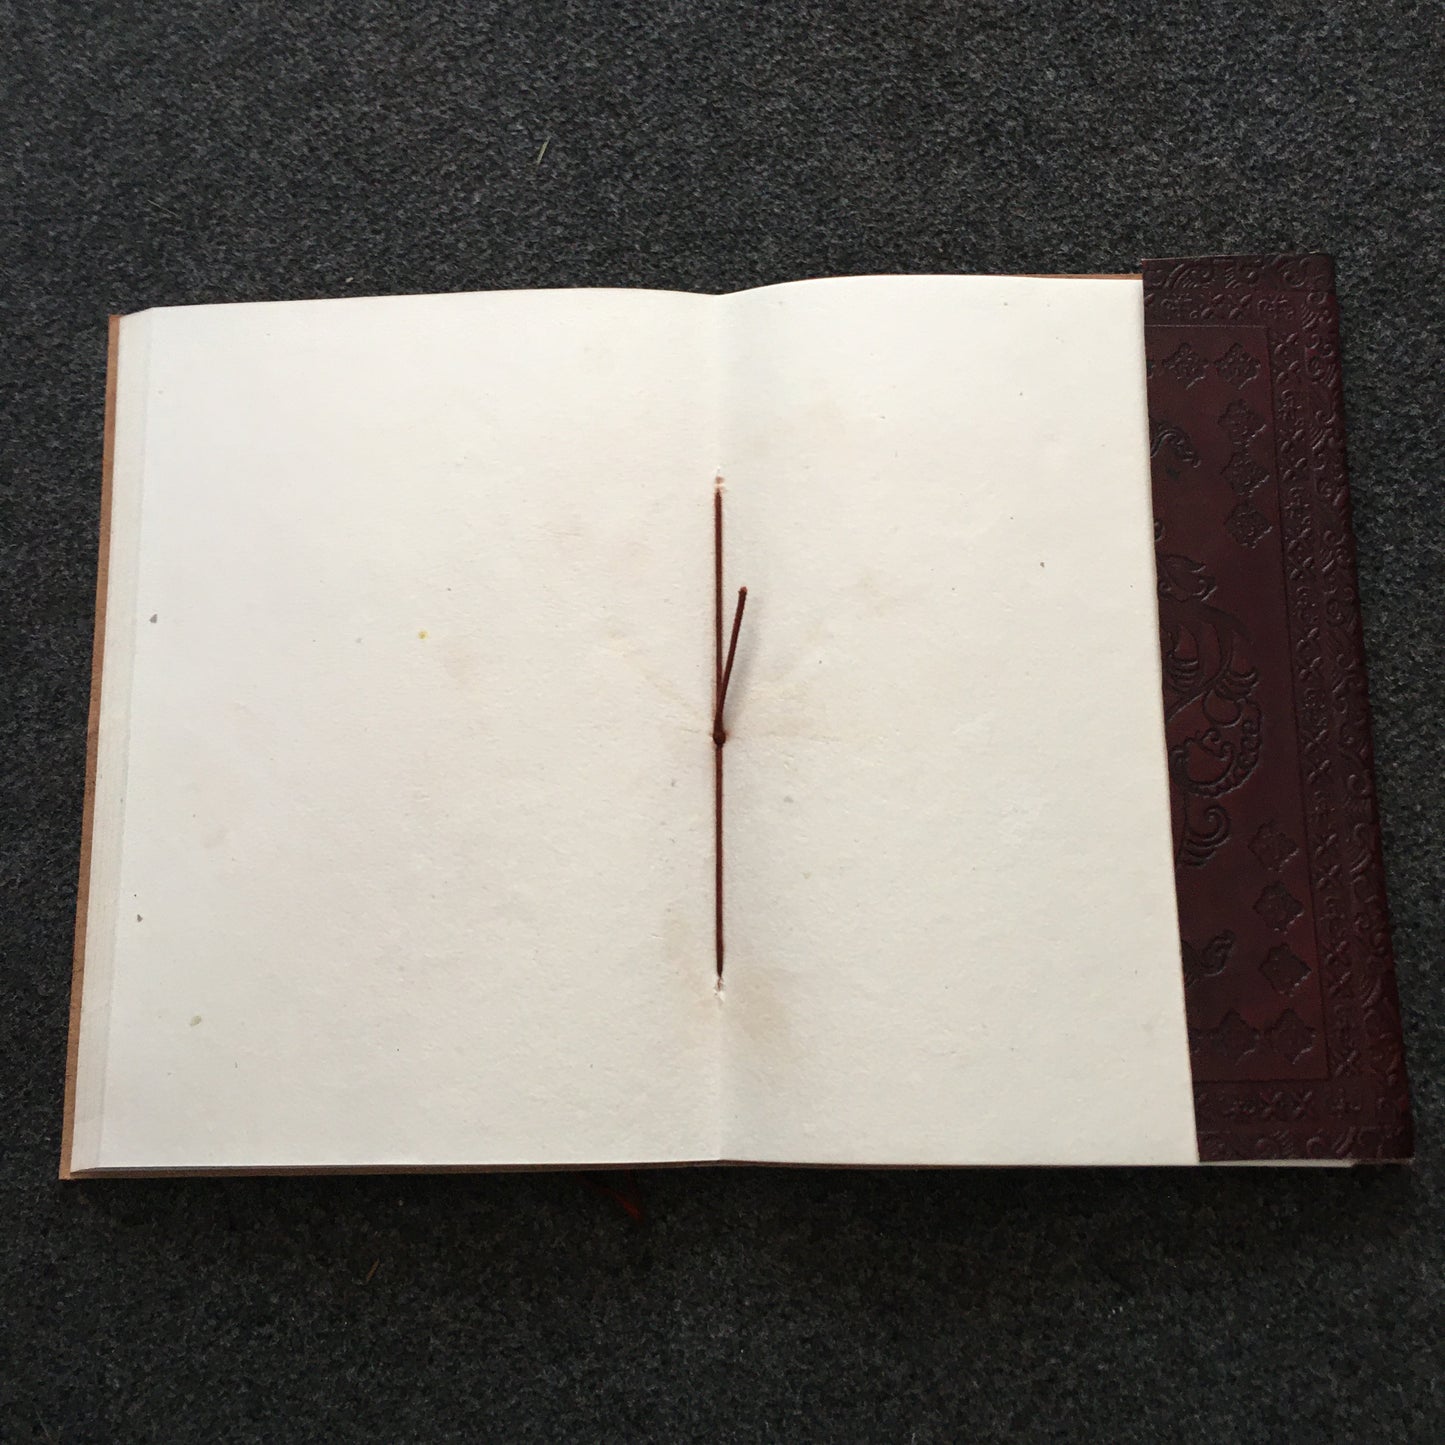 Handcrafted Leather Diary - 7x10 Inch - 40 Pages